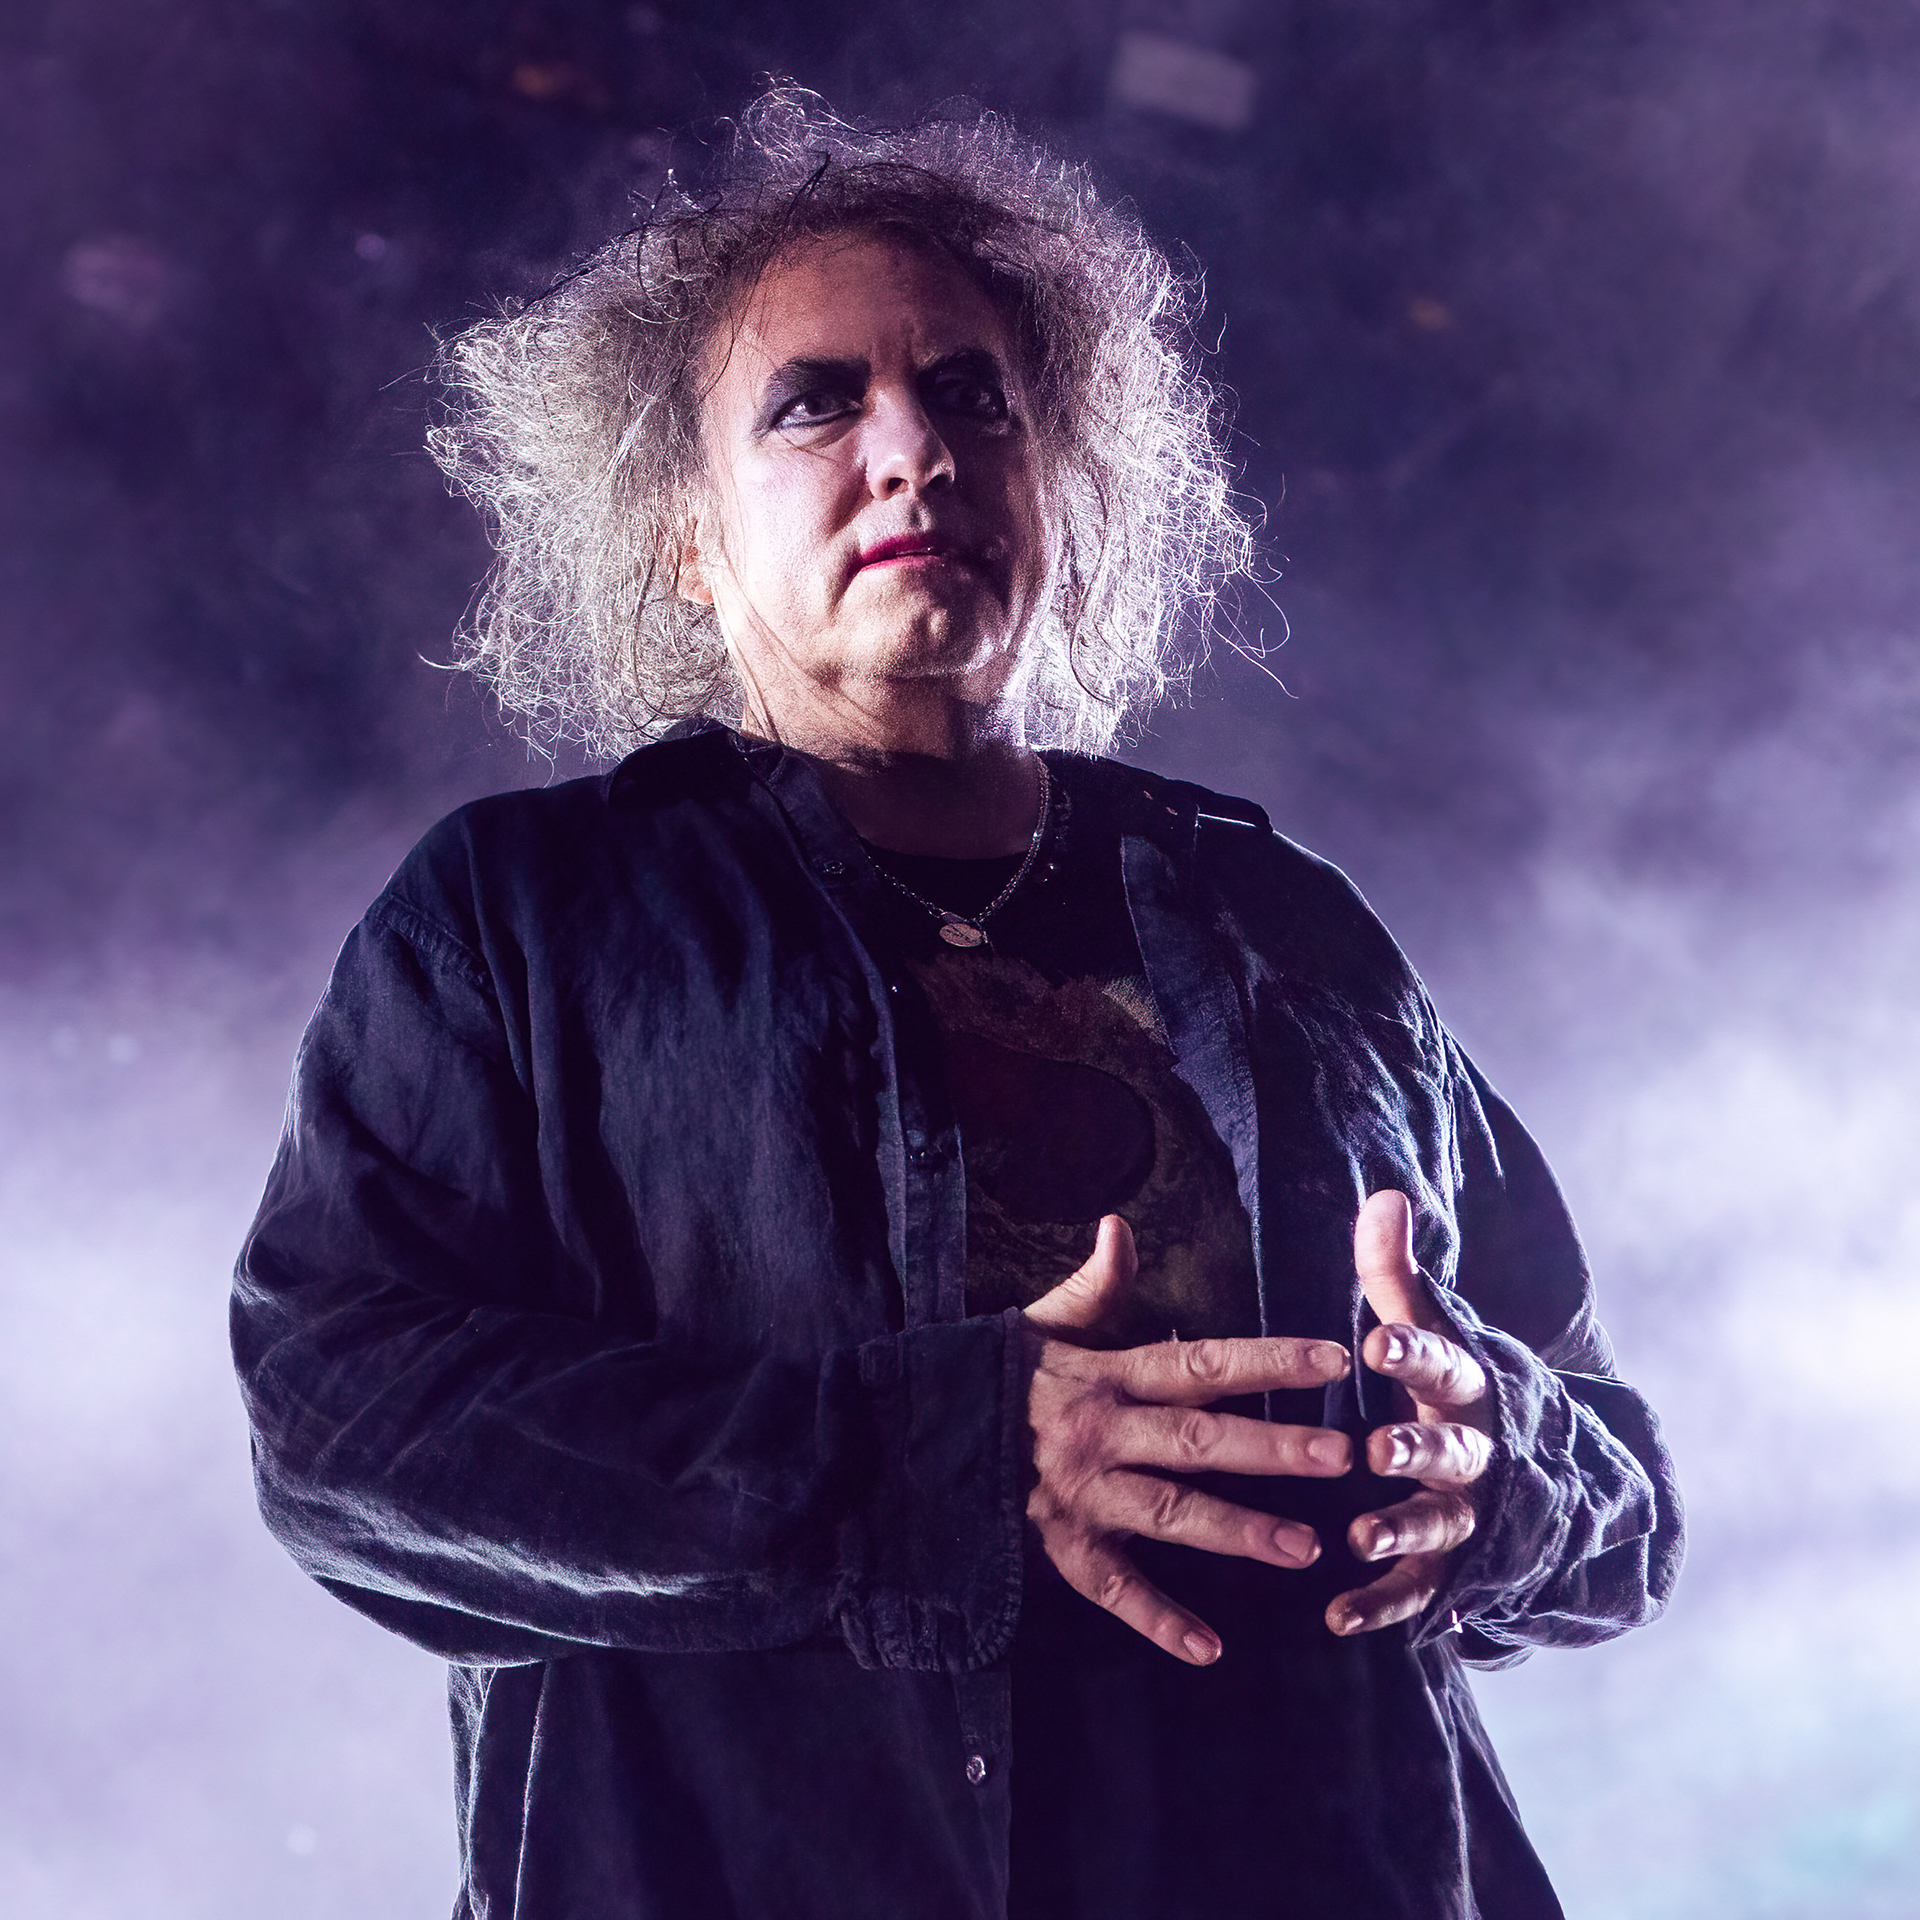 Best of music in 2022: The Cure perform at Mediolanum Forum, Milano